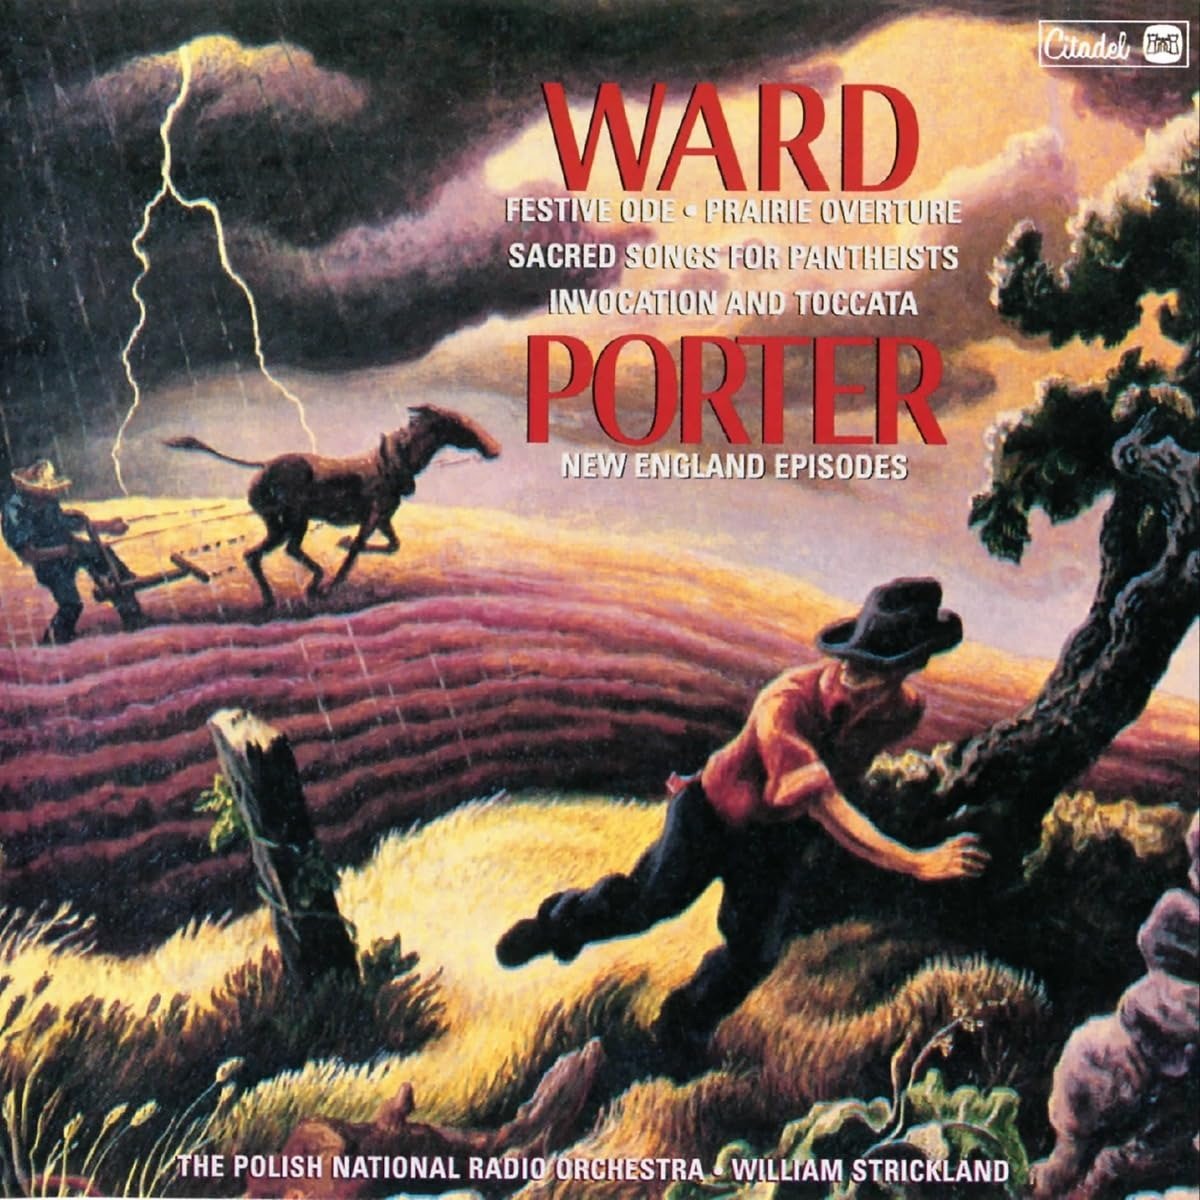 CD Shop - WARD, ROBERT FESTIVE ODE/PRAIRIE OVERTURE/INVOCATION/TOCCATA/SACRED SONGS FOR PANTHEISTS/PORTER